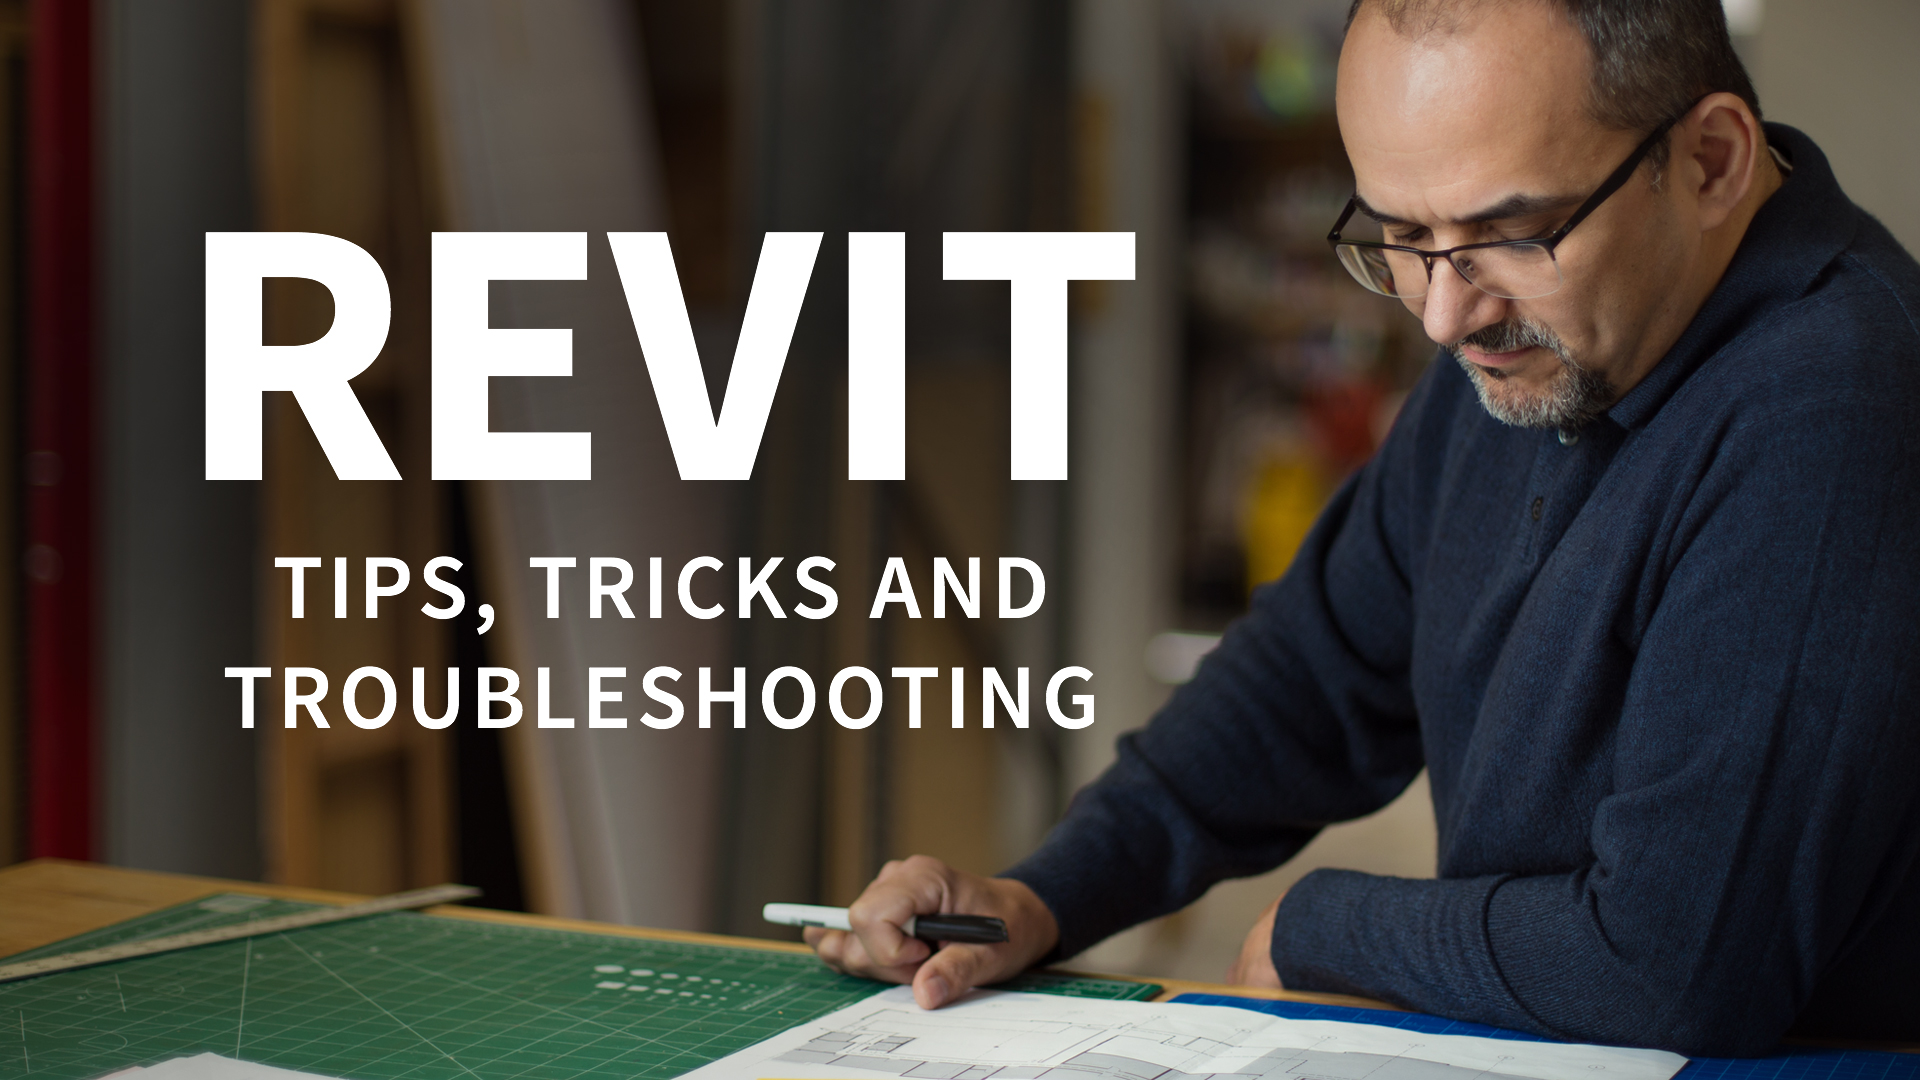 Revit: Tips, Tricks, and Troubleshooting (Updated 6/4/2019)